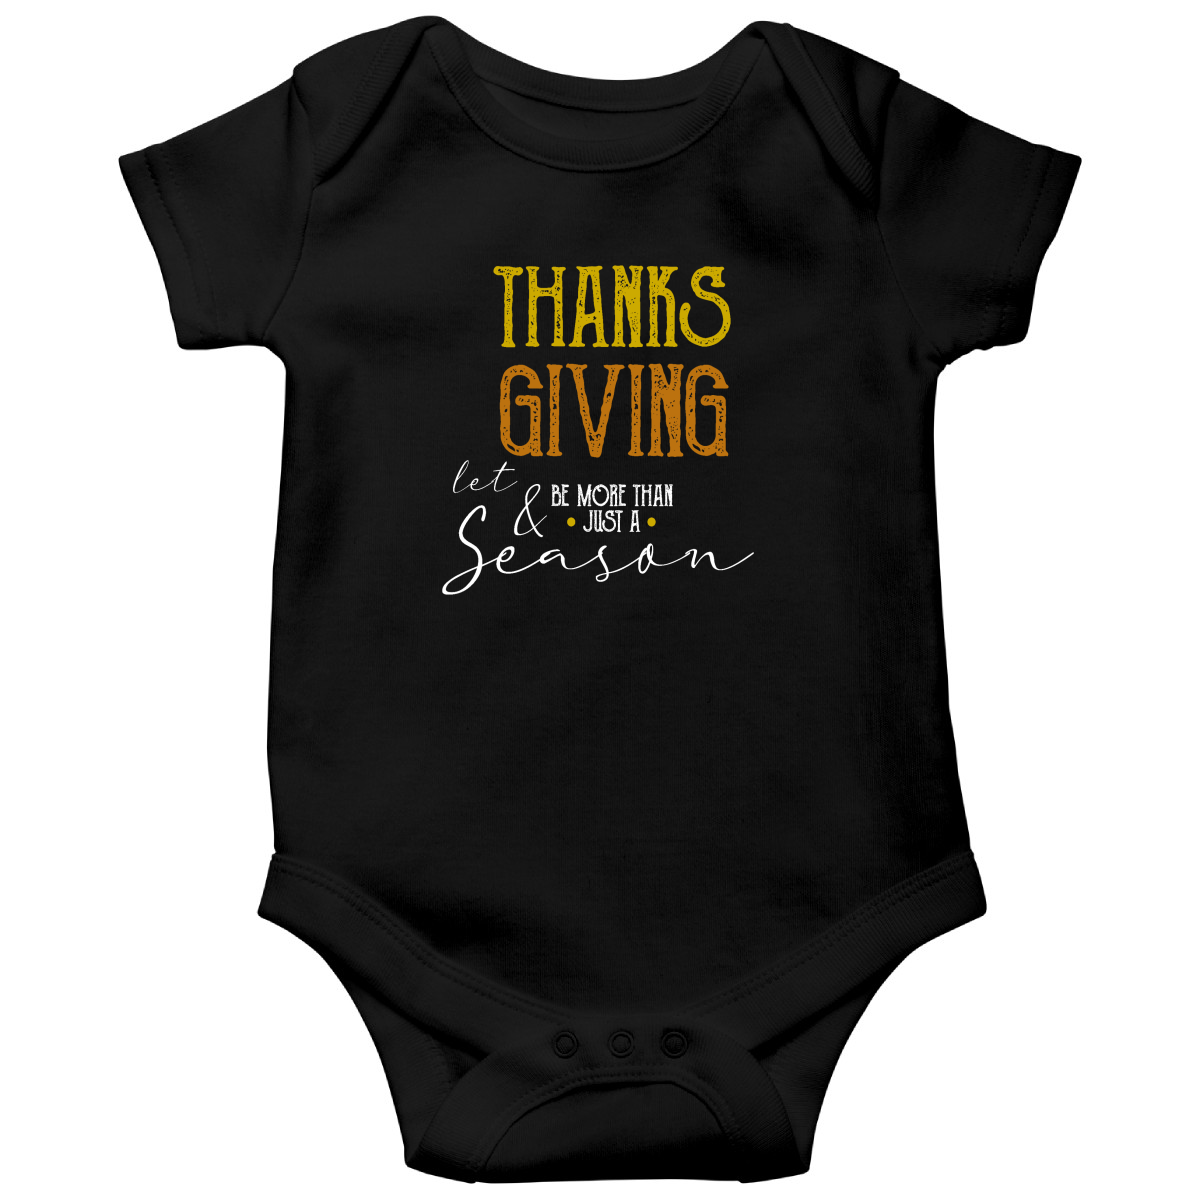 Thanks and Giving  Baby Bodysuits | Black